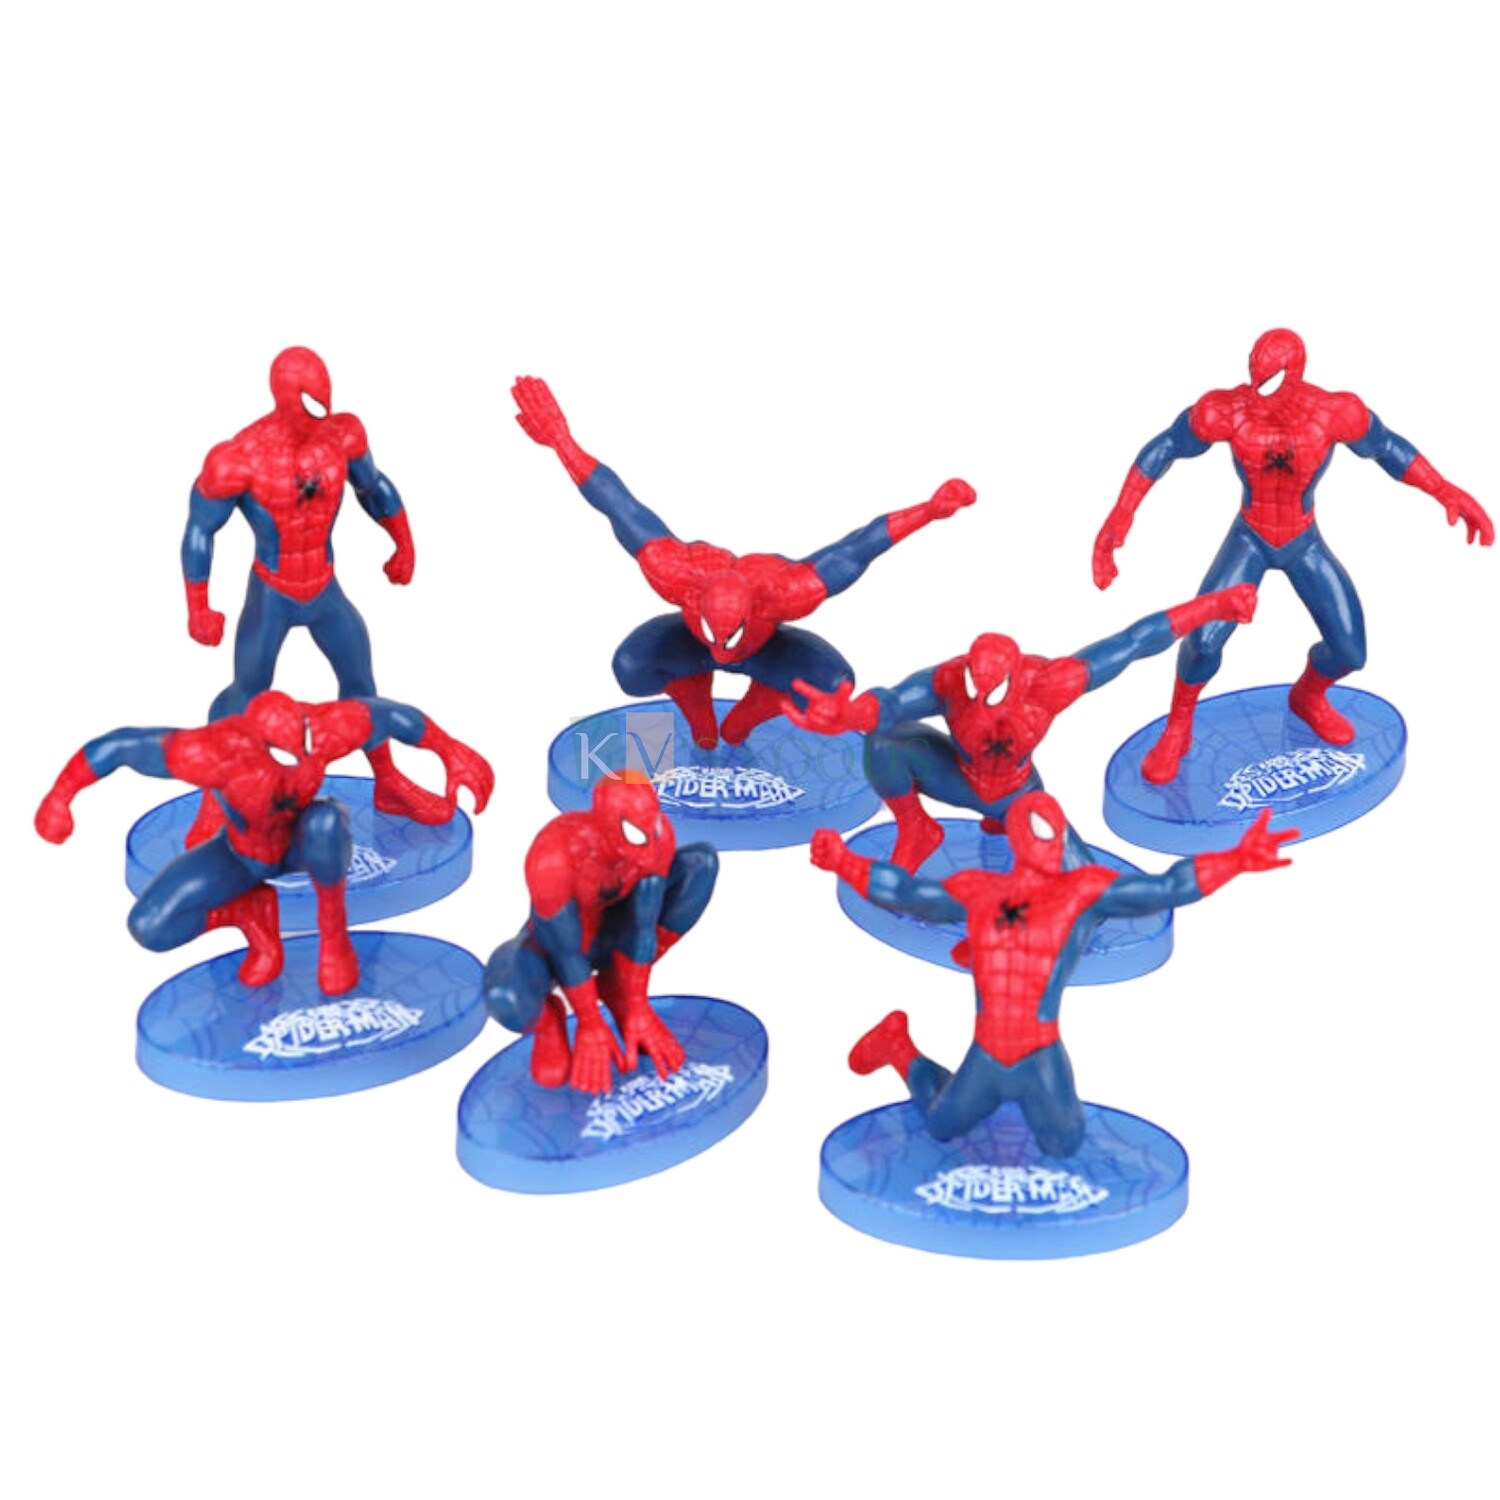 Buy 1PC or 7PCs Set Super Heroes Spiderman Action Figures Model Toy Spider Man Cake Topper Decoration, Miniature Figurine, Gift Children's Play Toys Set